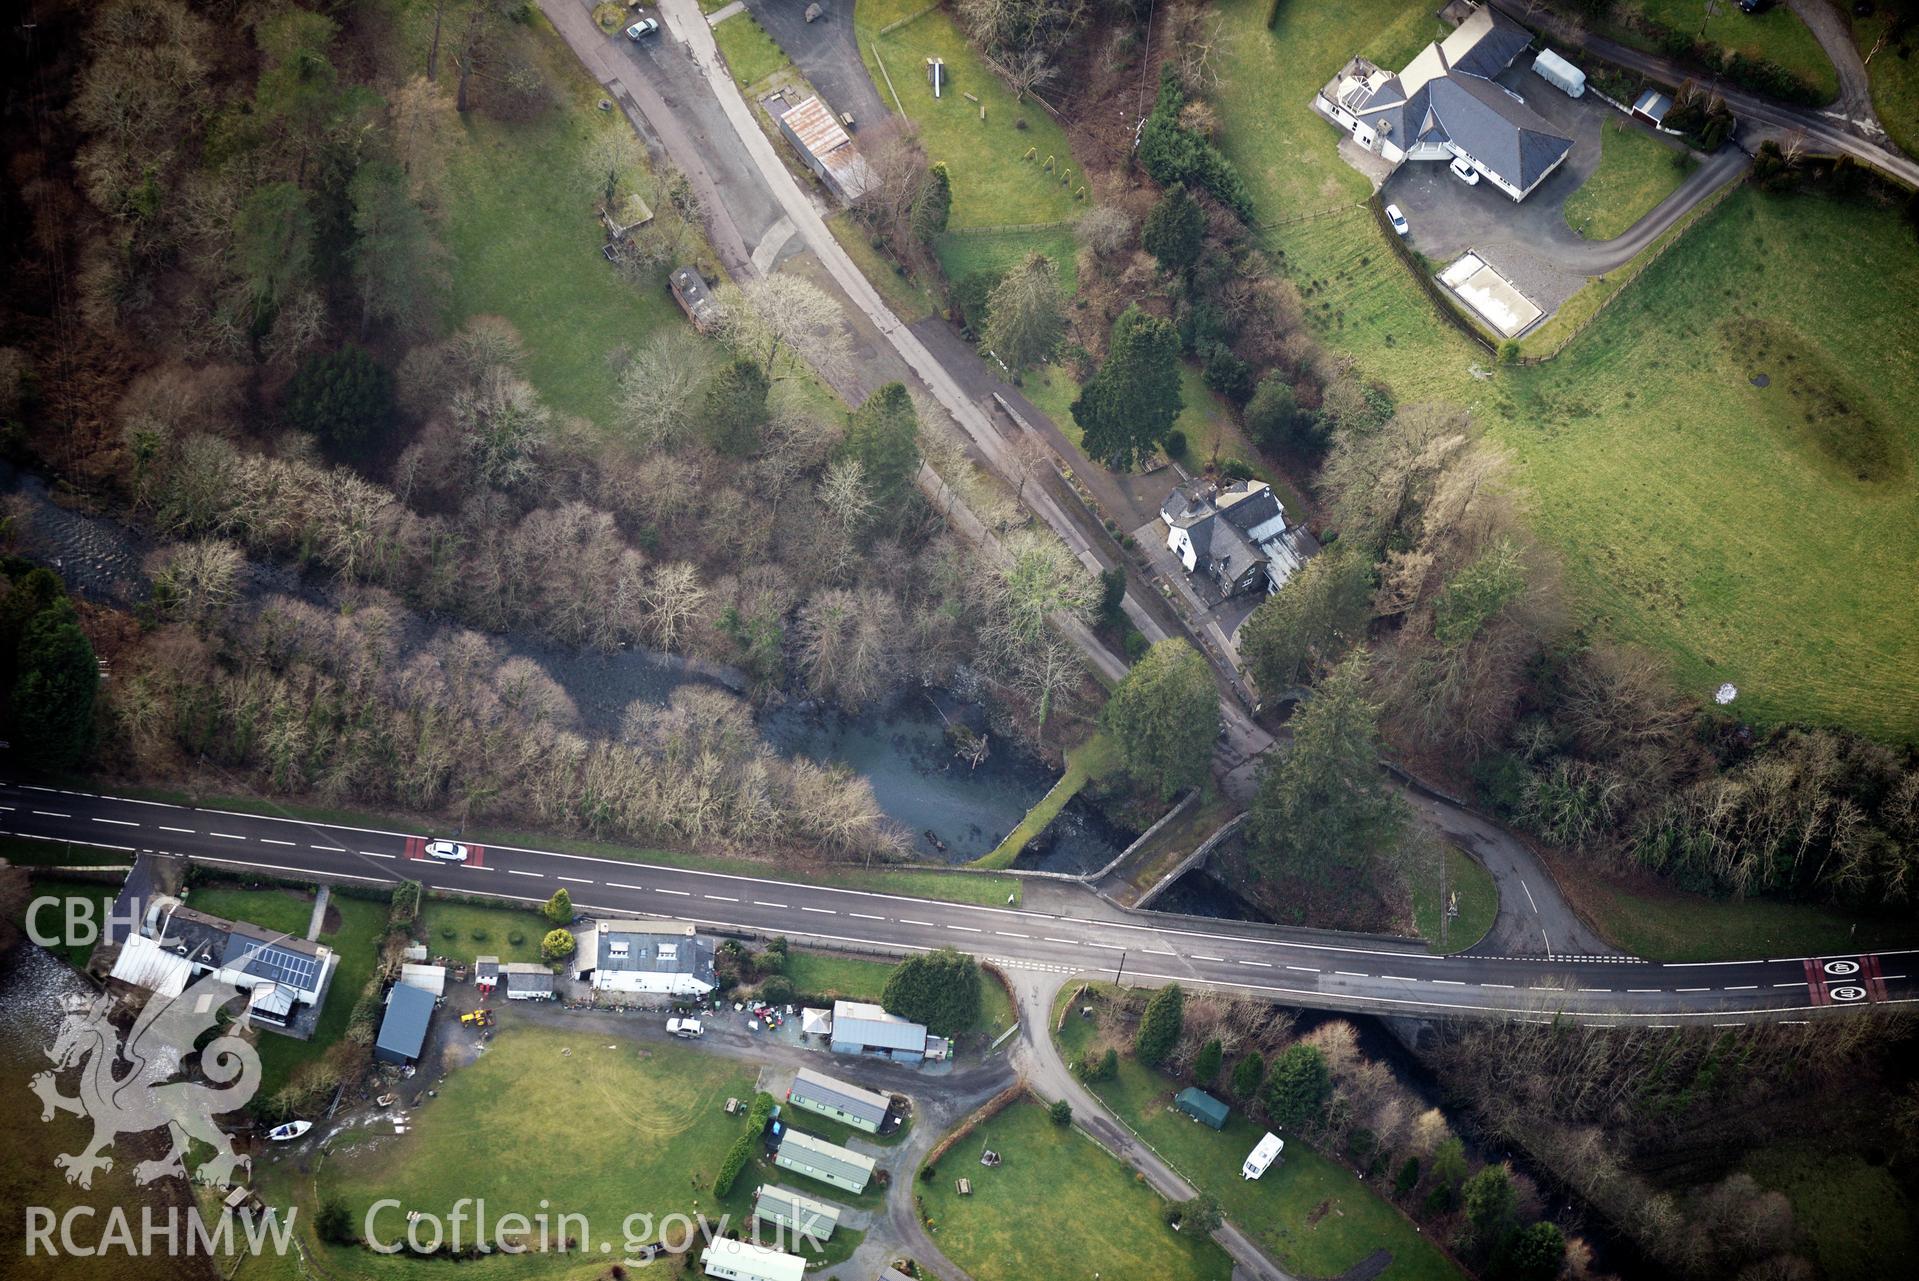 The former Dinas Mawddwy railway station and Pont Minllyn, which crosses the river Dyfi, in the village of Minllyn near Dinas Mawddwy, Dolgellau. Oblique aerial photograph taken during the Royal Commission's programme of archaeological aerial reconnaissance by Toby Driver on 4th February 2015.